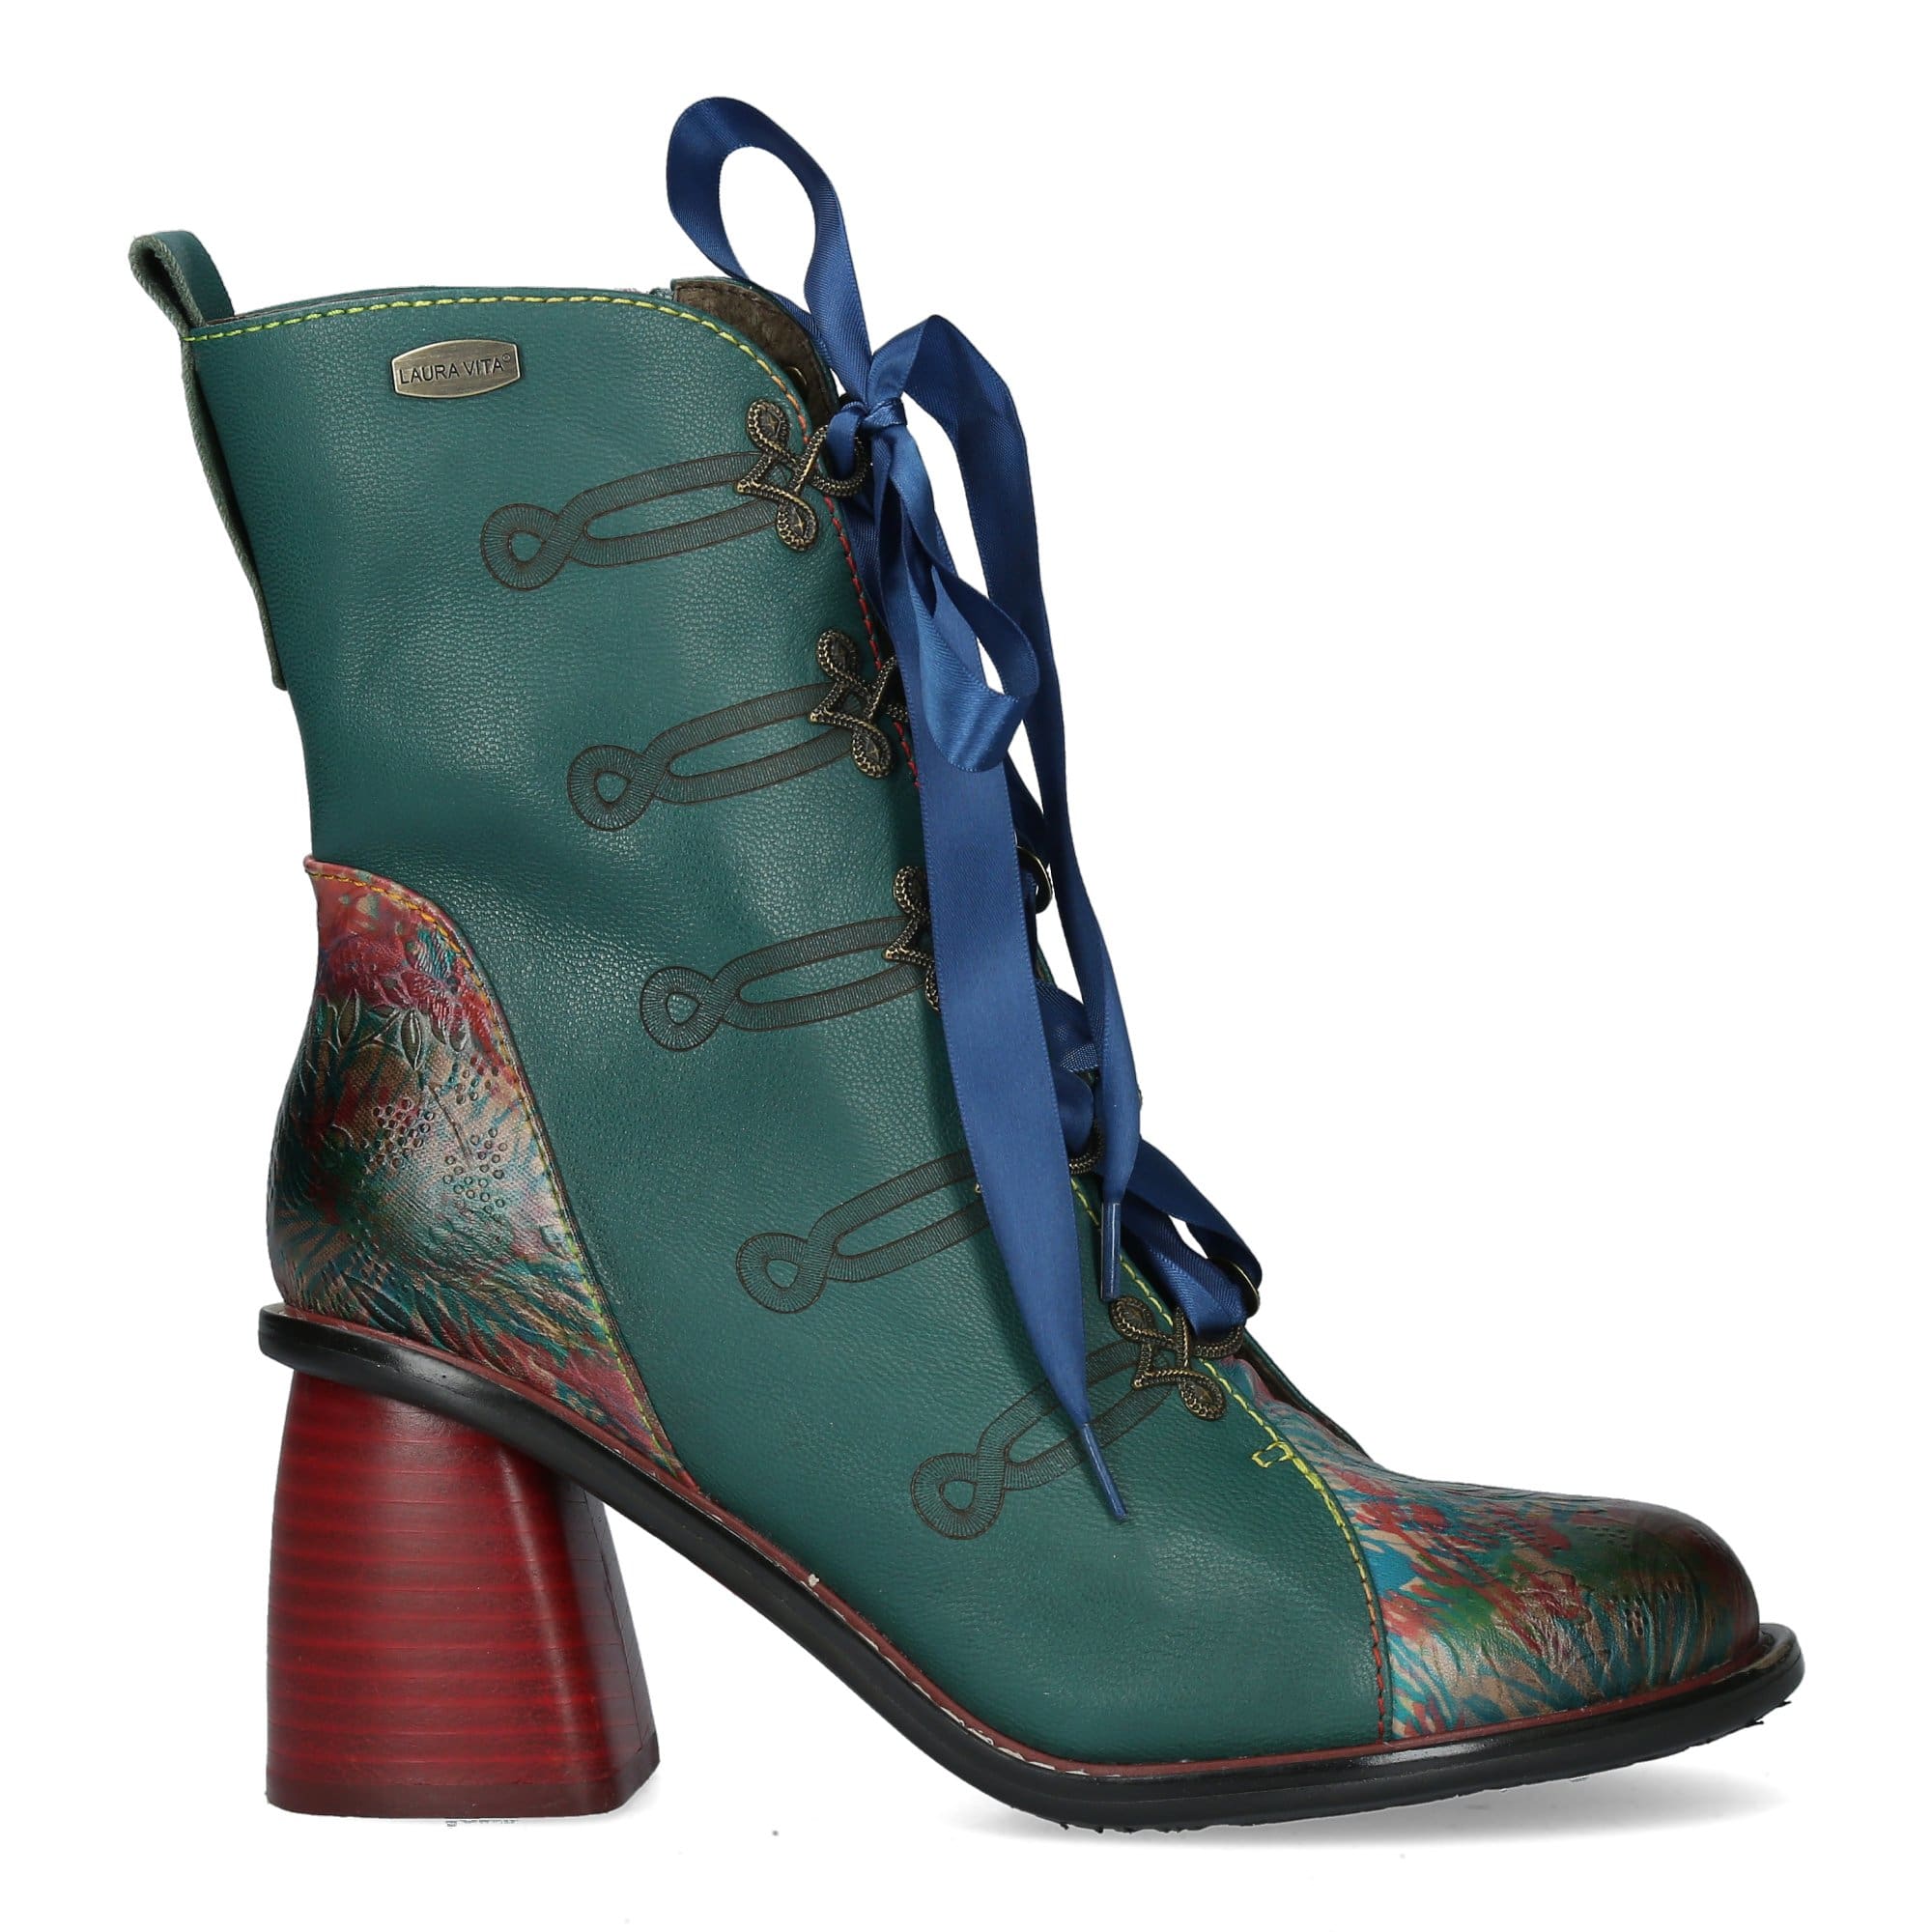 EVCAO 01 - 35 / Turquoise - Boots